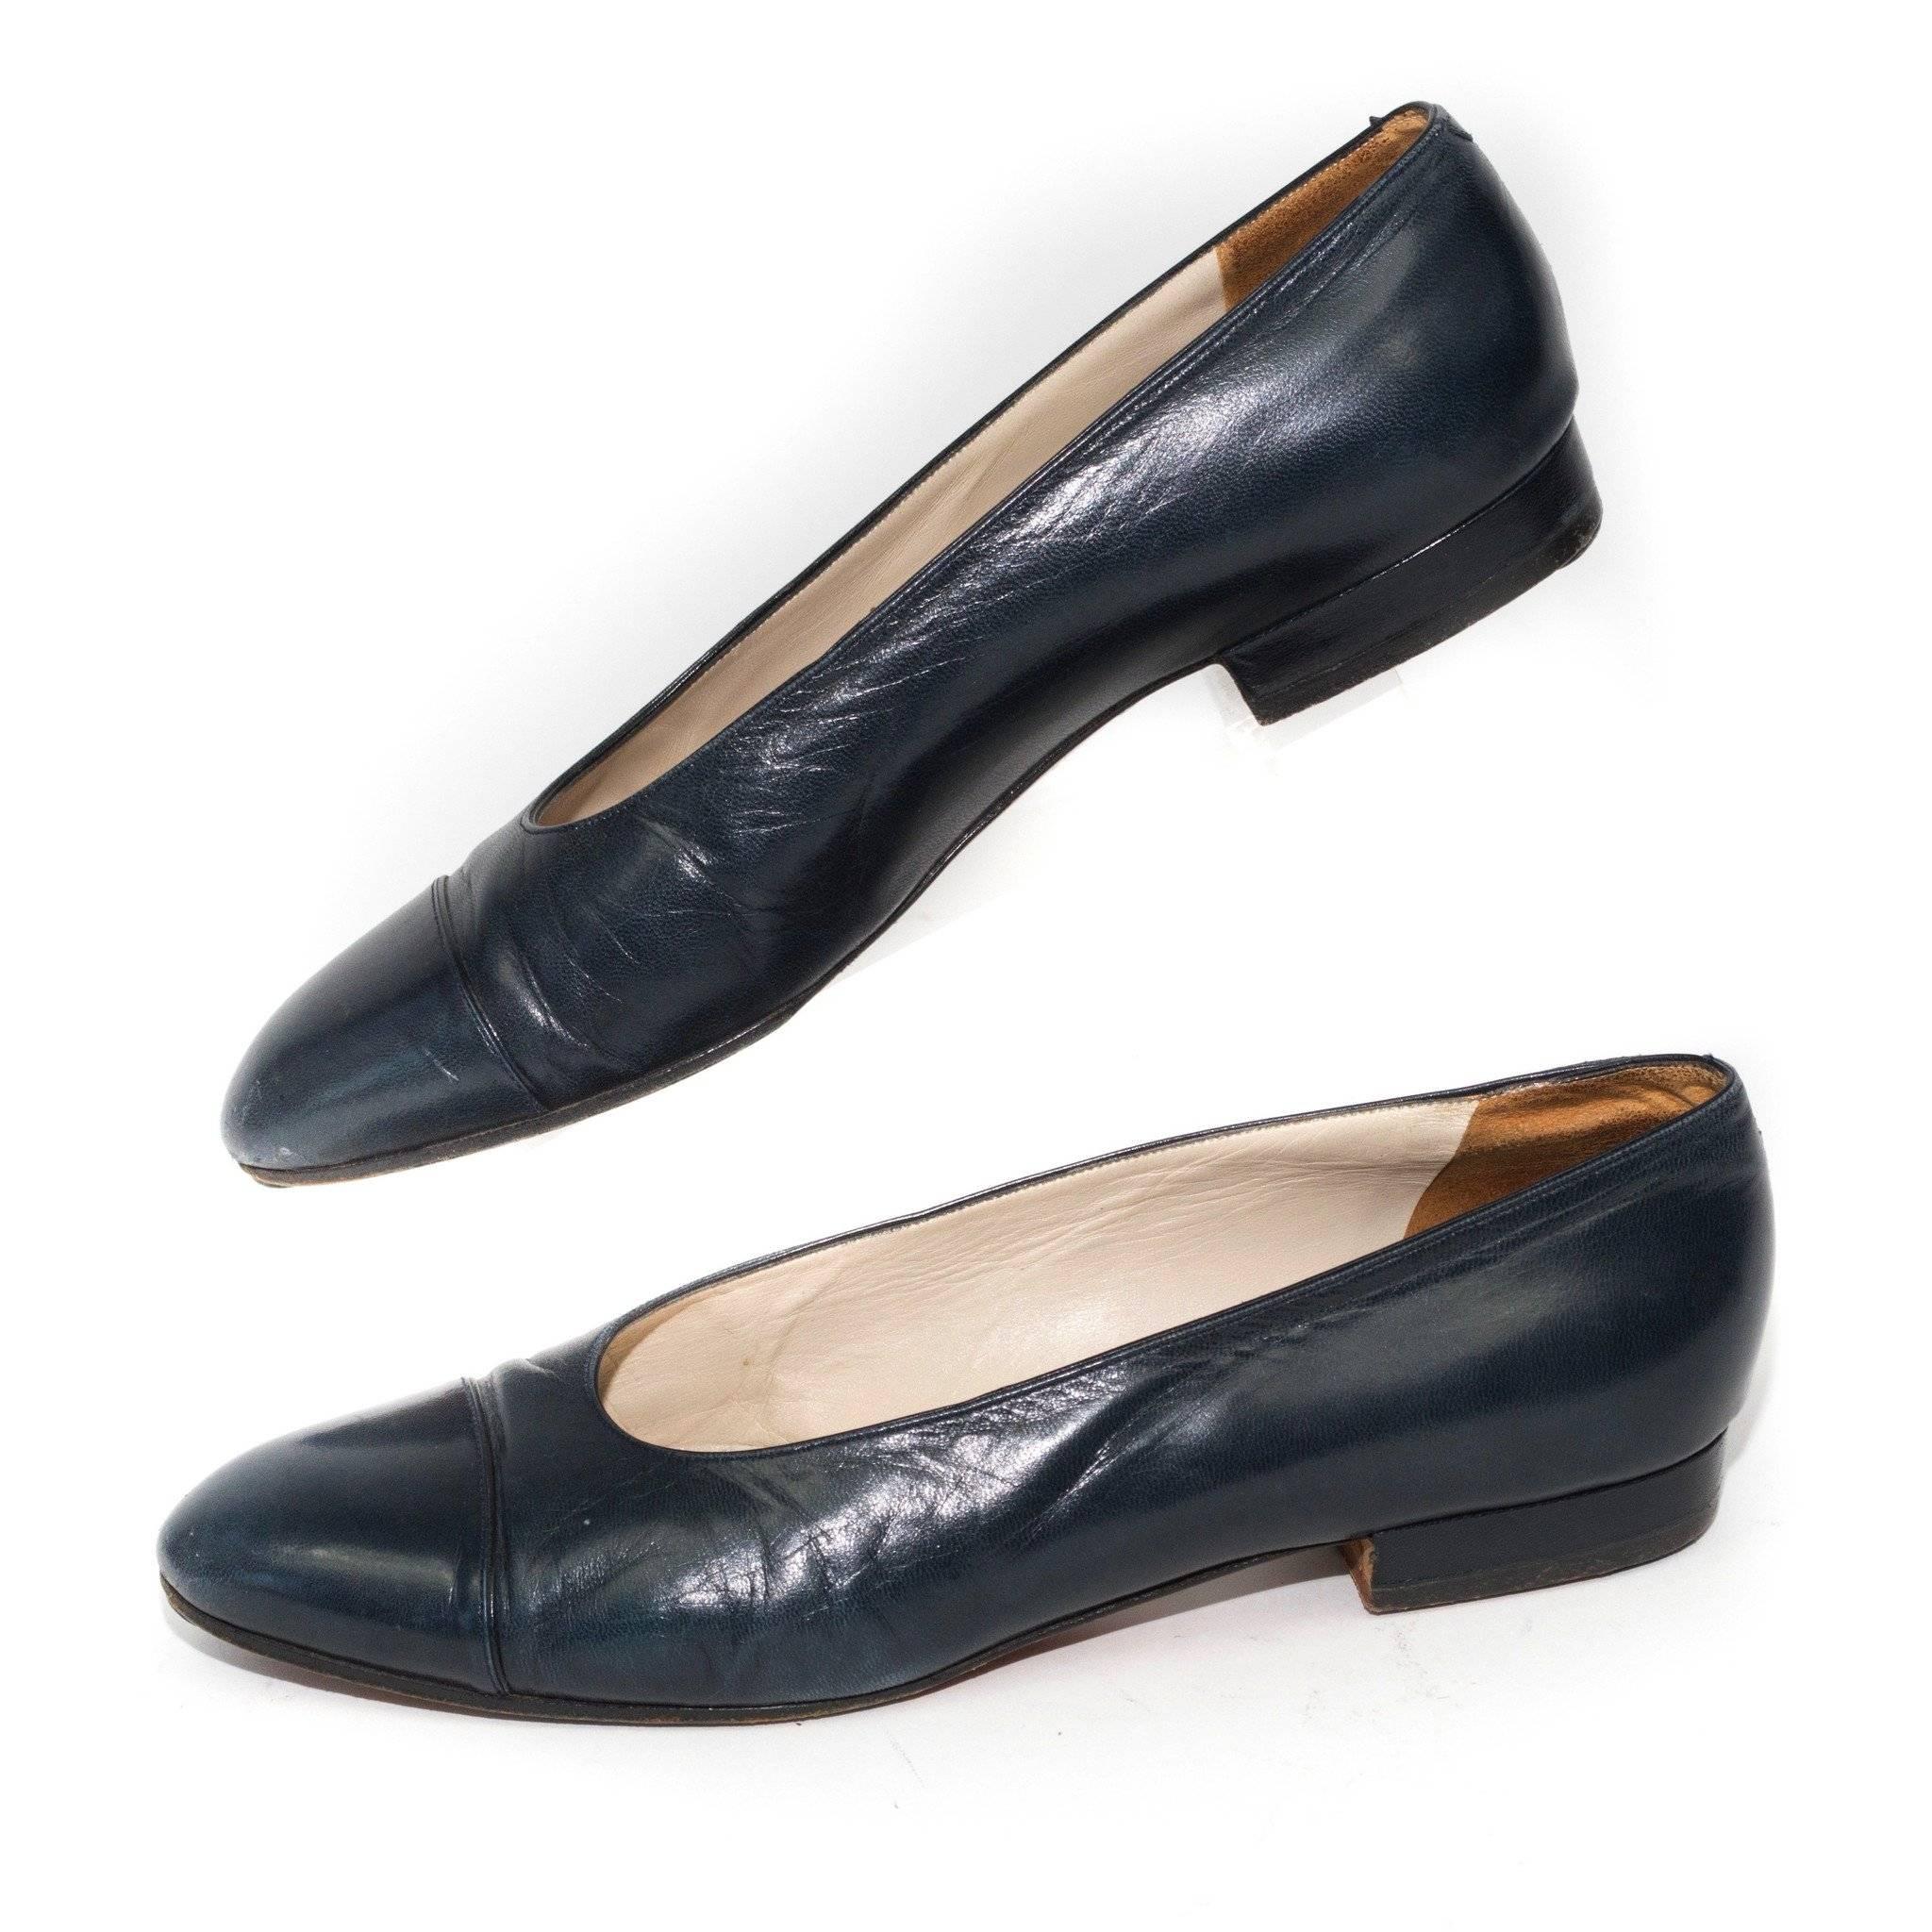 Chanel classic black leather flats with cap toes.

Size Marked:  37 1/2

Good Vintage Condition: Please remember all clothes are previously owned and gently worn unless otherwise noted. 